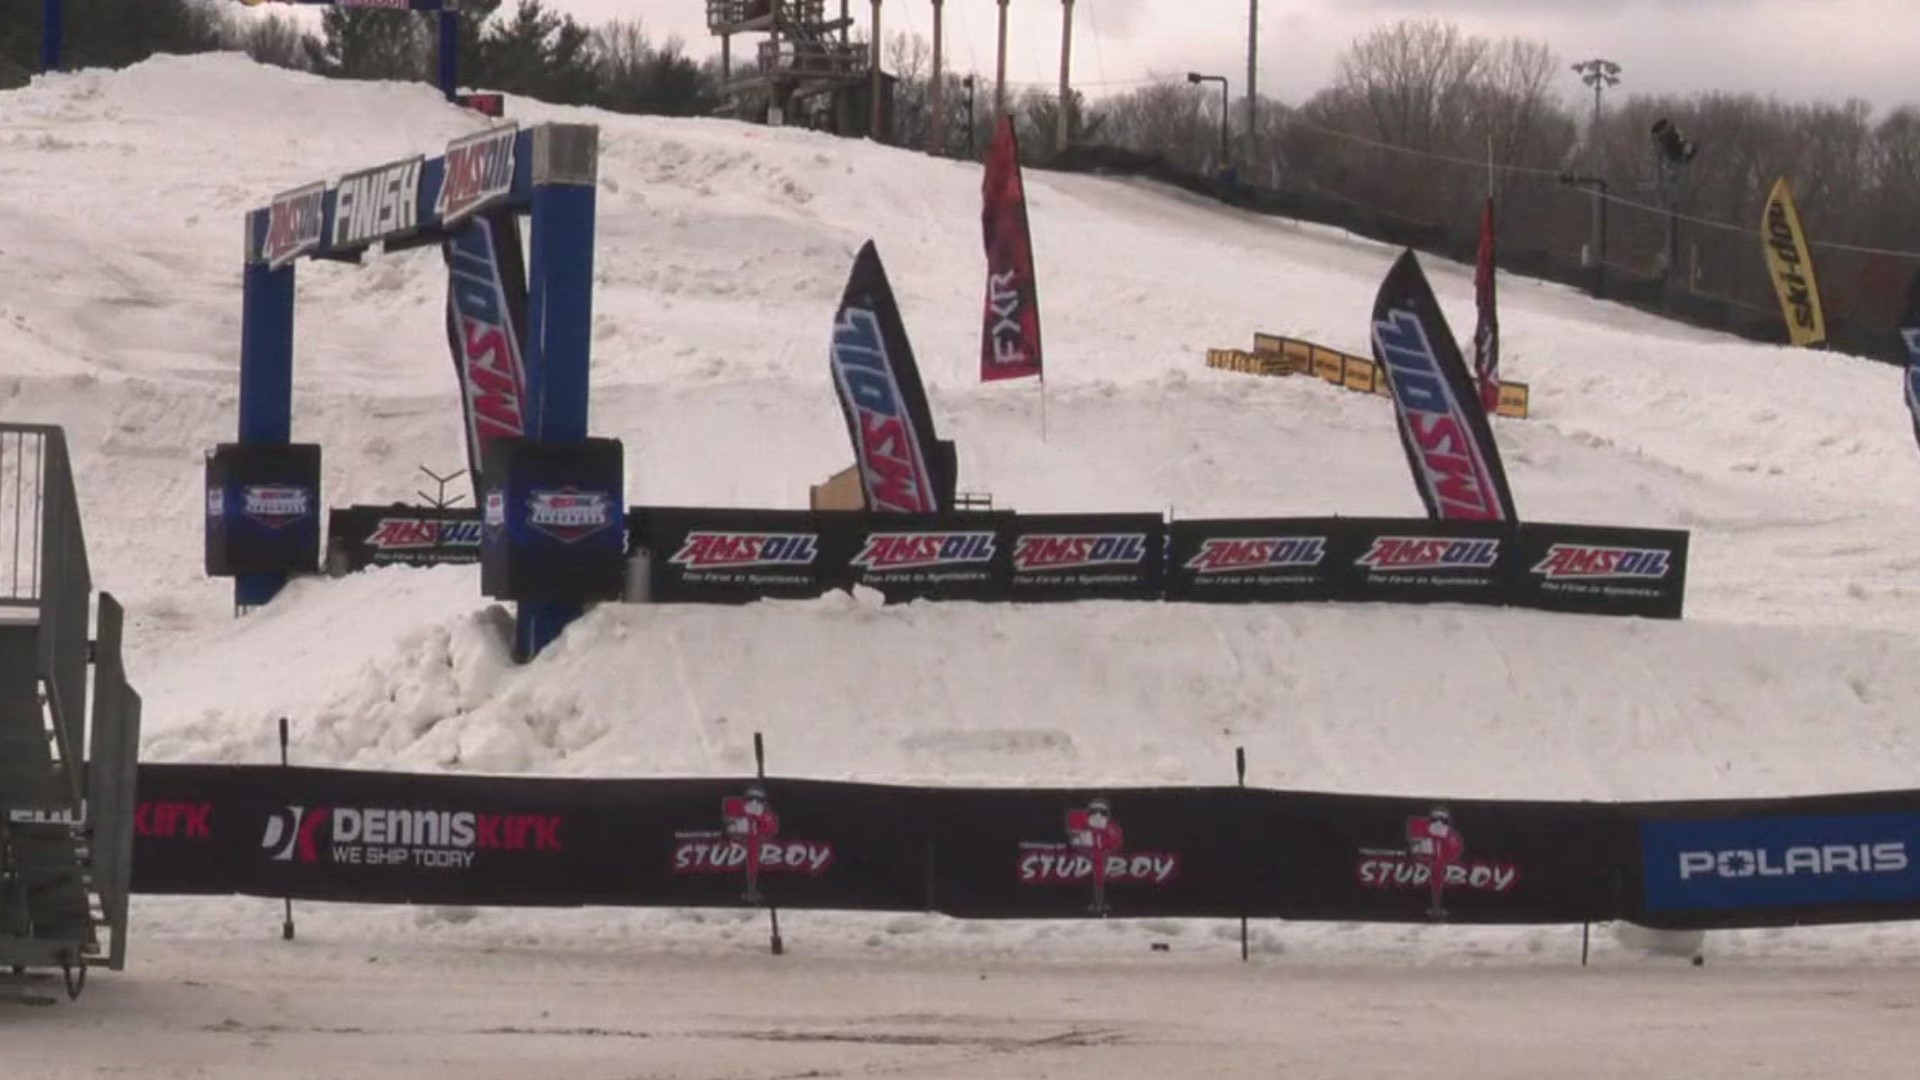 The Cannonsburg Snocross National features the best snowmobilers from around the country.